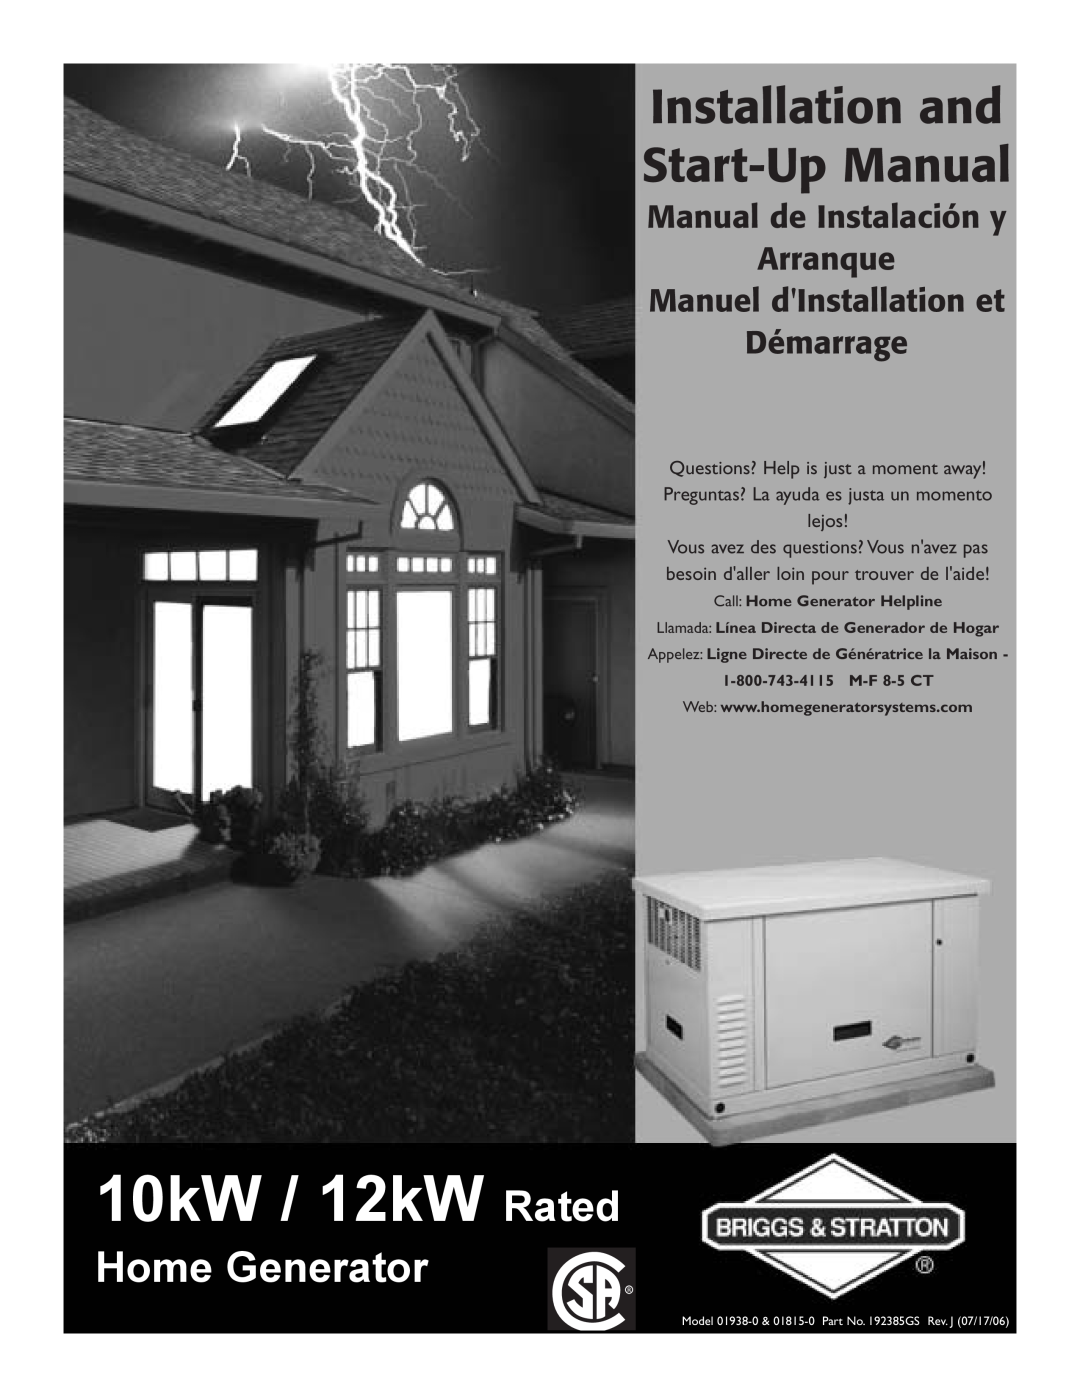 Briggs & Stratton 01815-0, 01938-0 manual 10kW / 12kW Rated, Installation and Start-Up Manual, Home Generator 